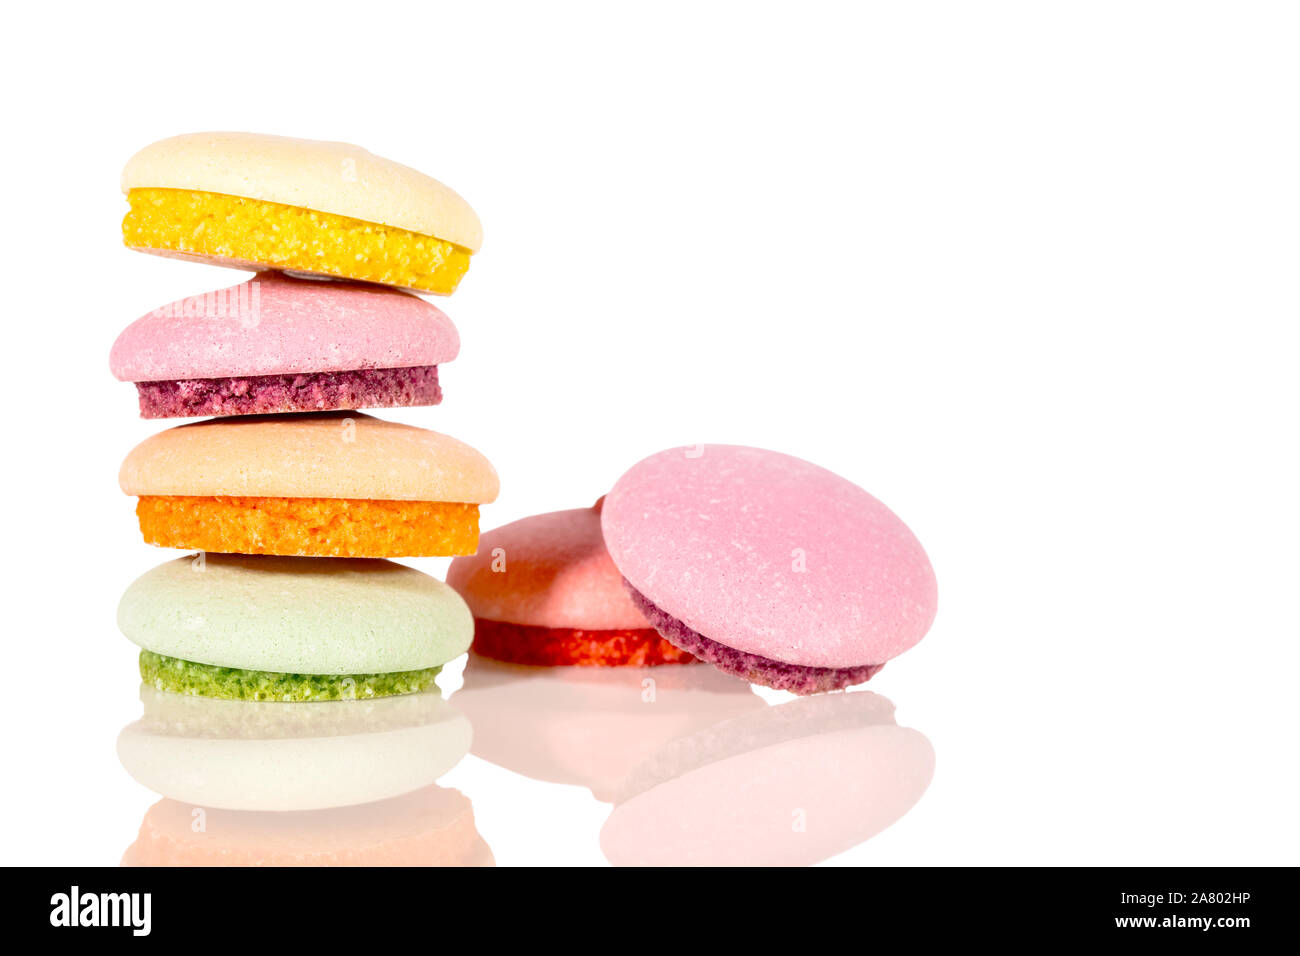 Sweet colorful biscuits or macarons, isolated on white background with copyspace Stock Photo